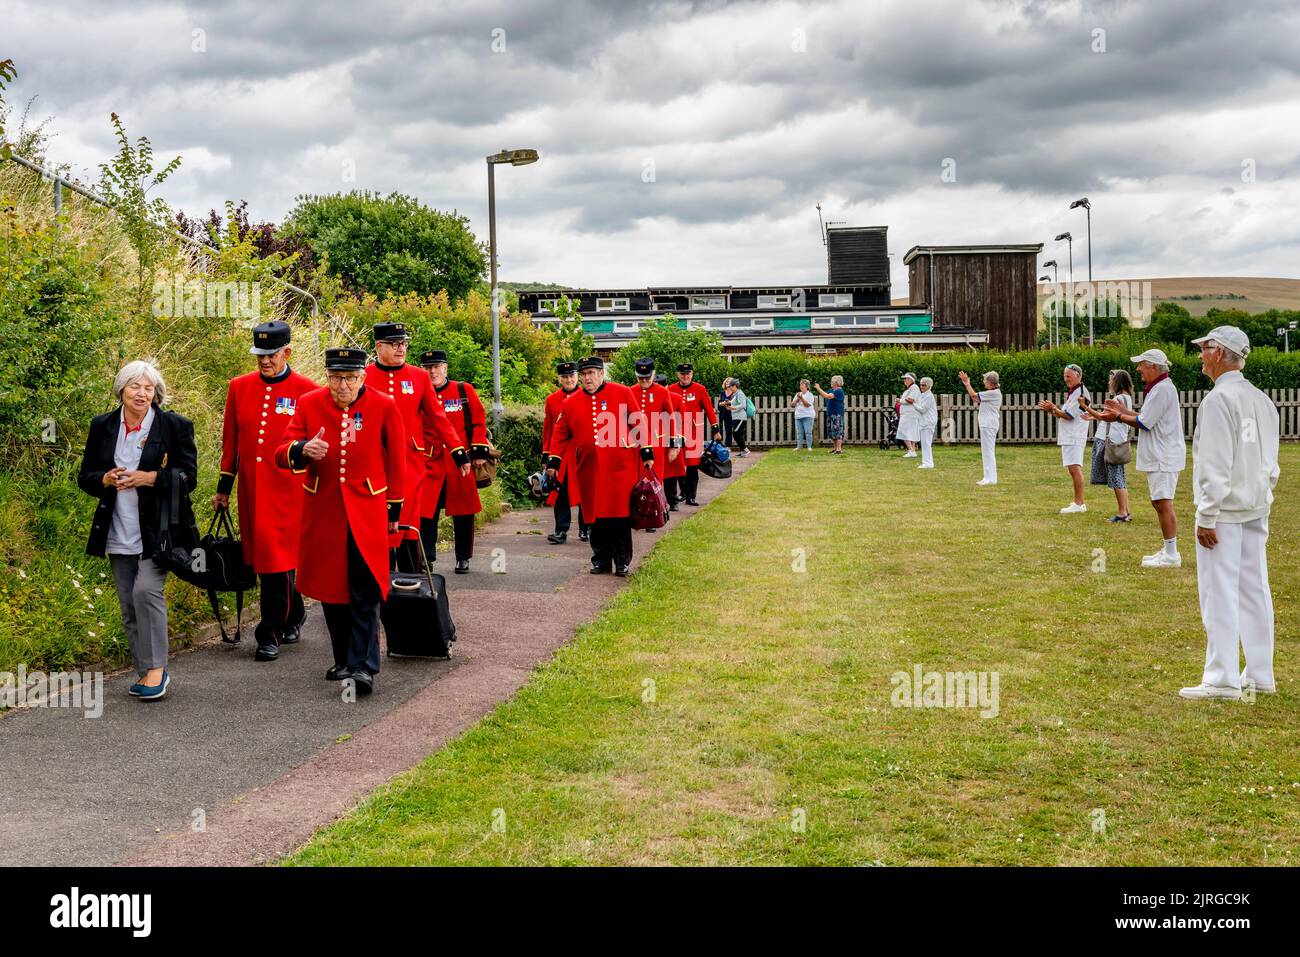 Il Chelsea Pensioners Bowls Team arriva a Lewes e viene applaudito dalla Local Bowls Team, Lewes, East Sussex, UK. Foto Stock